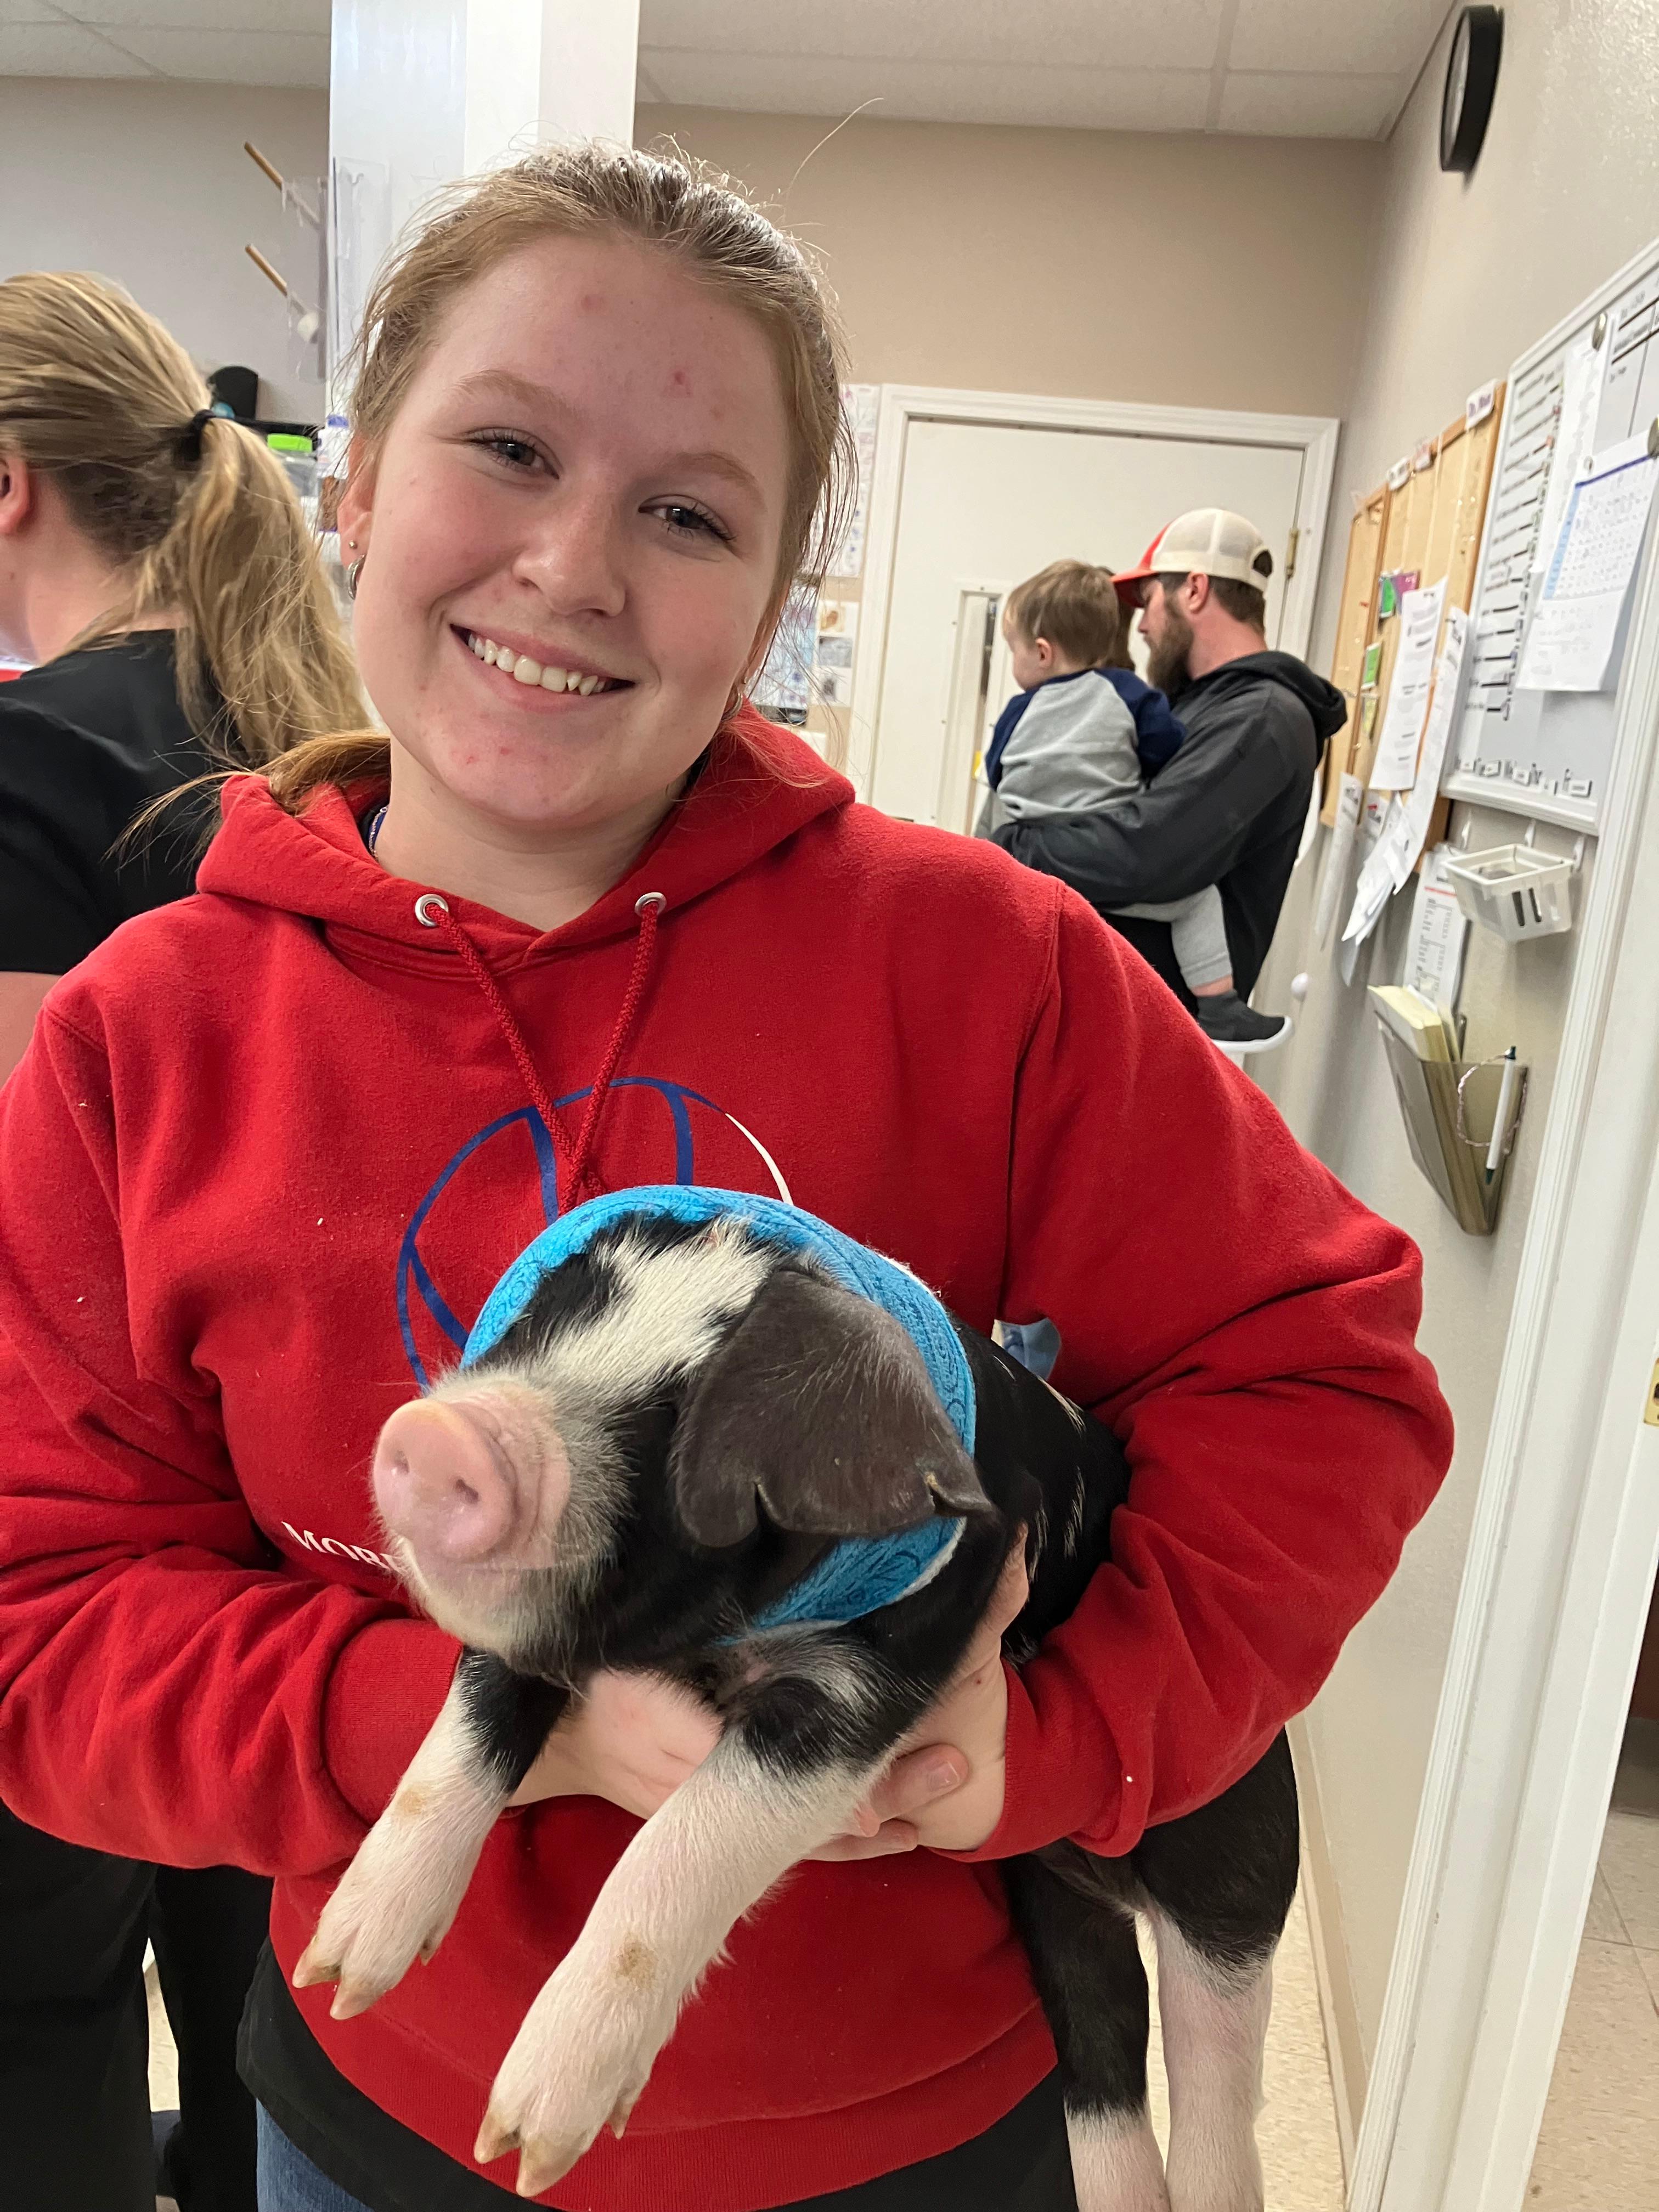 Our team member with an adorable piggy patient